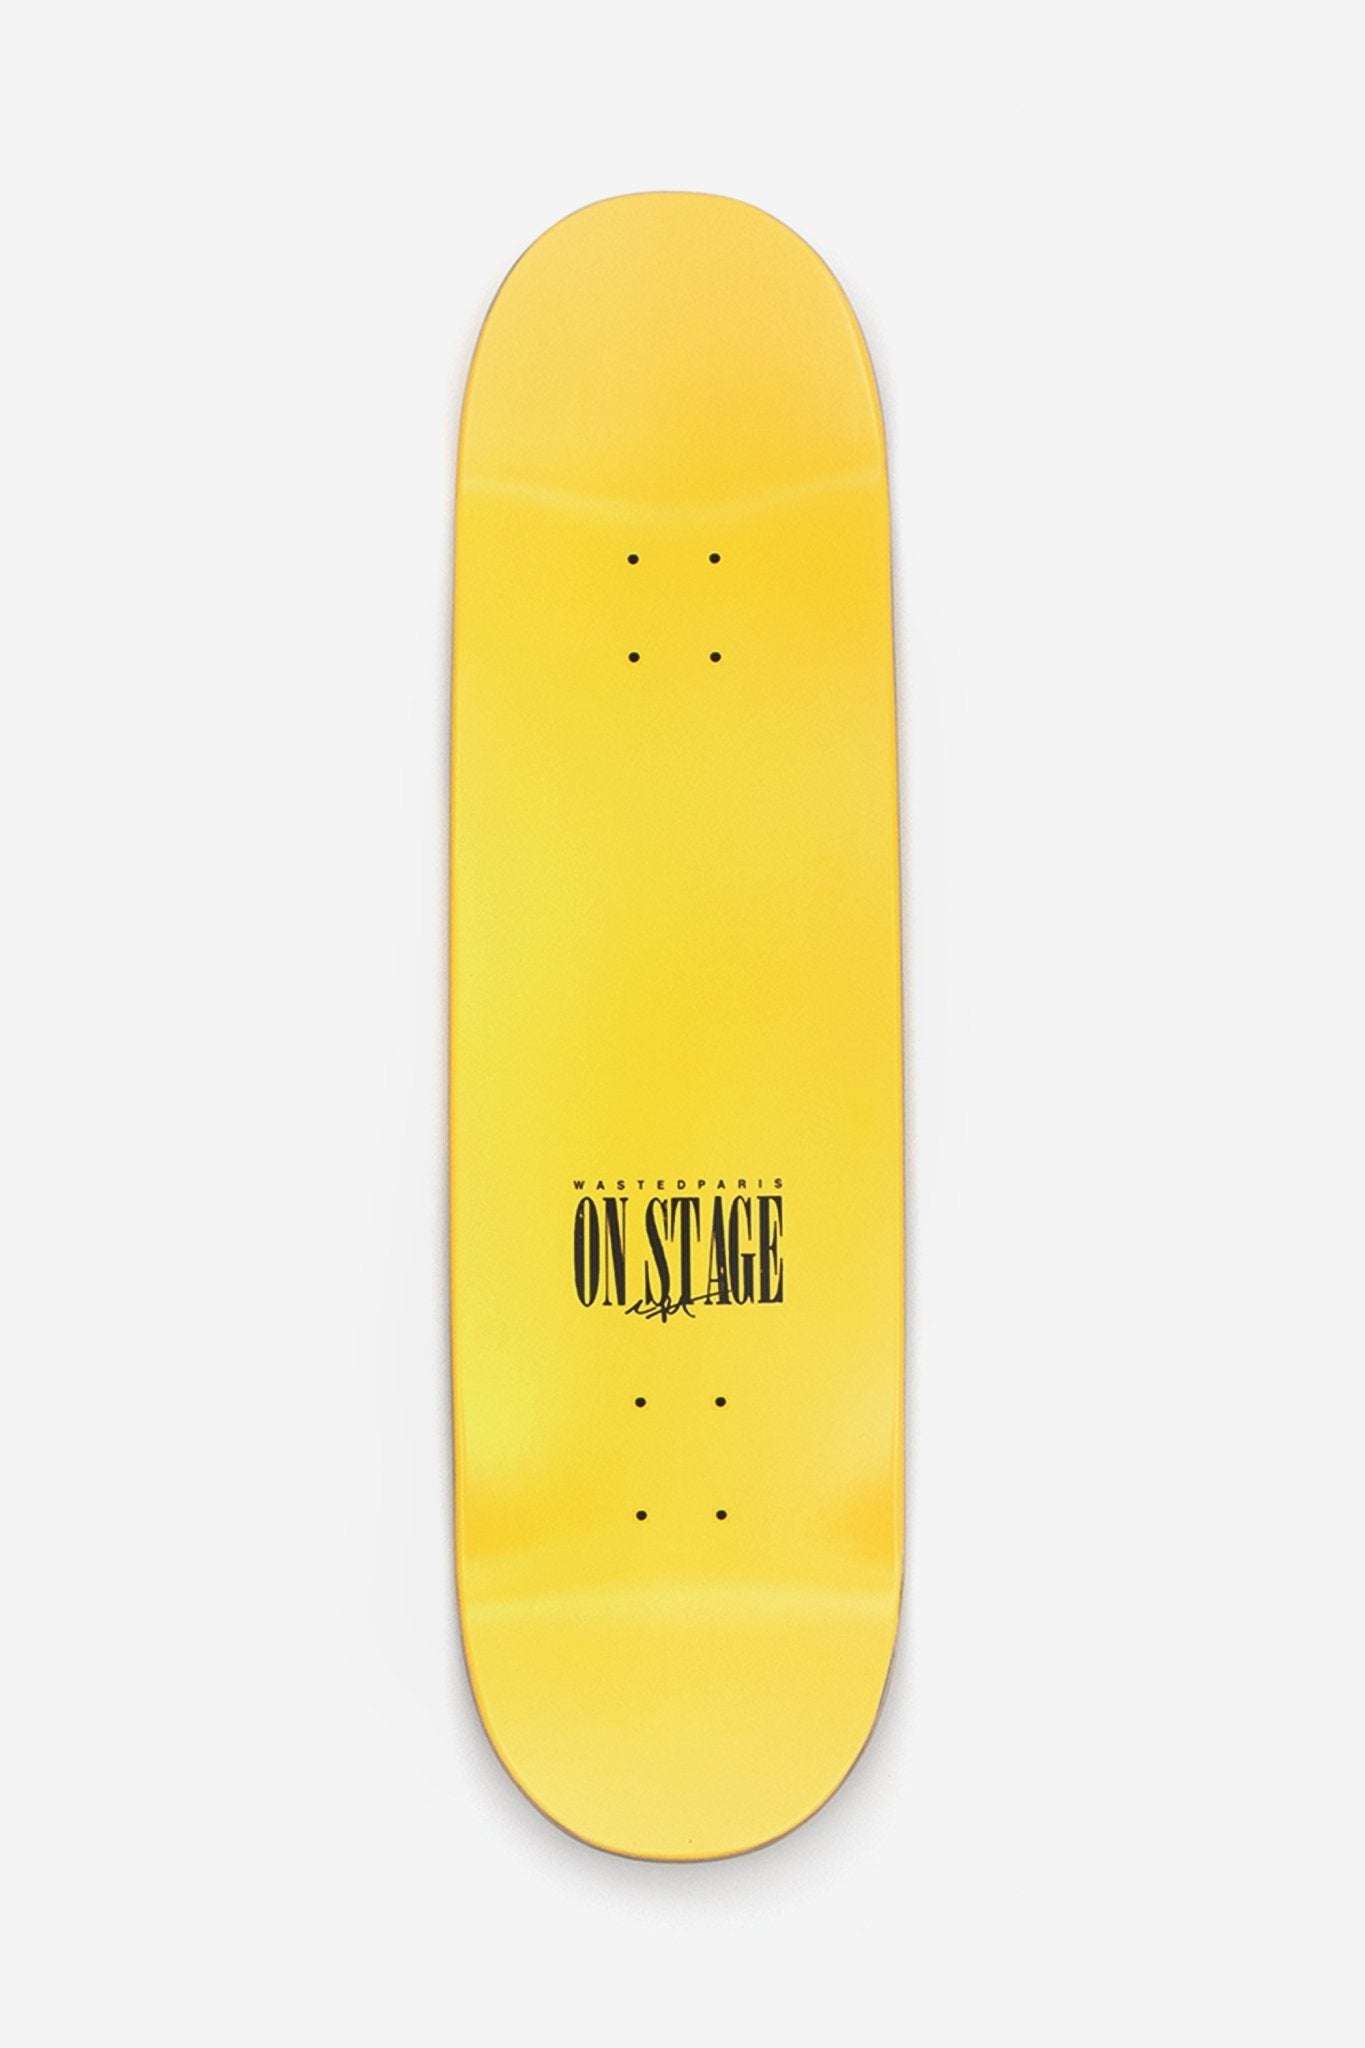 Board Glory Wasted x Charles Peterson Jaune - WASTED PARIS